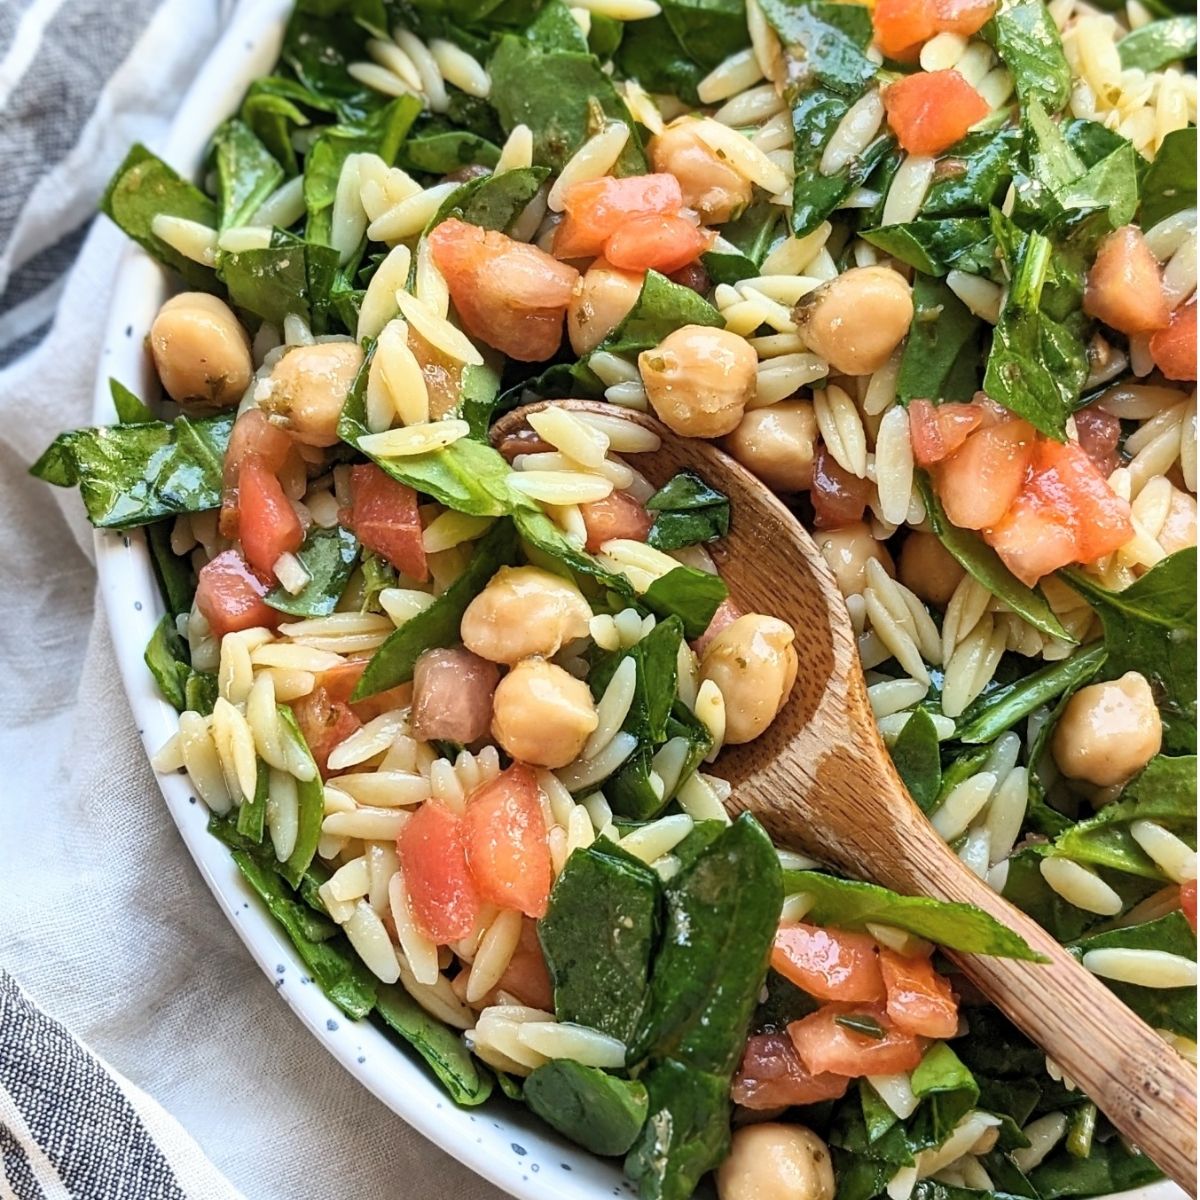 Trader Joe’s Pasta Salad Recipe with Orzo & Spinach (4 Ingredients)